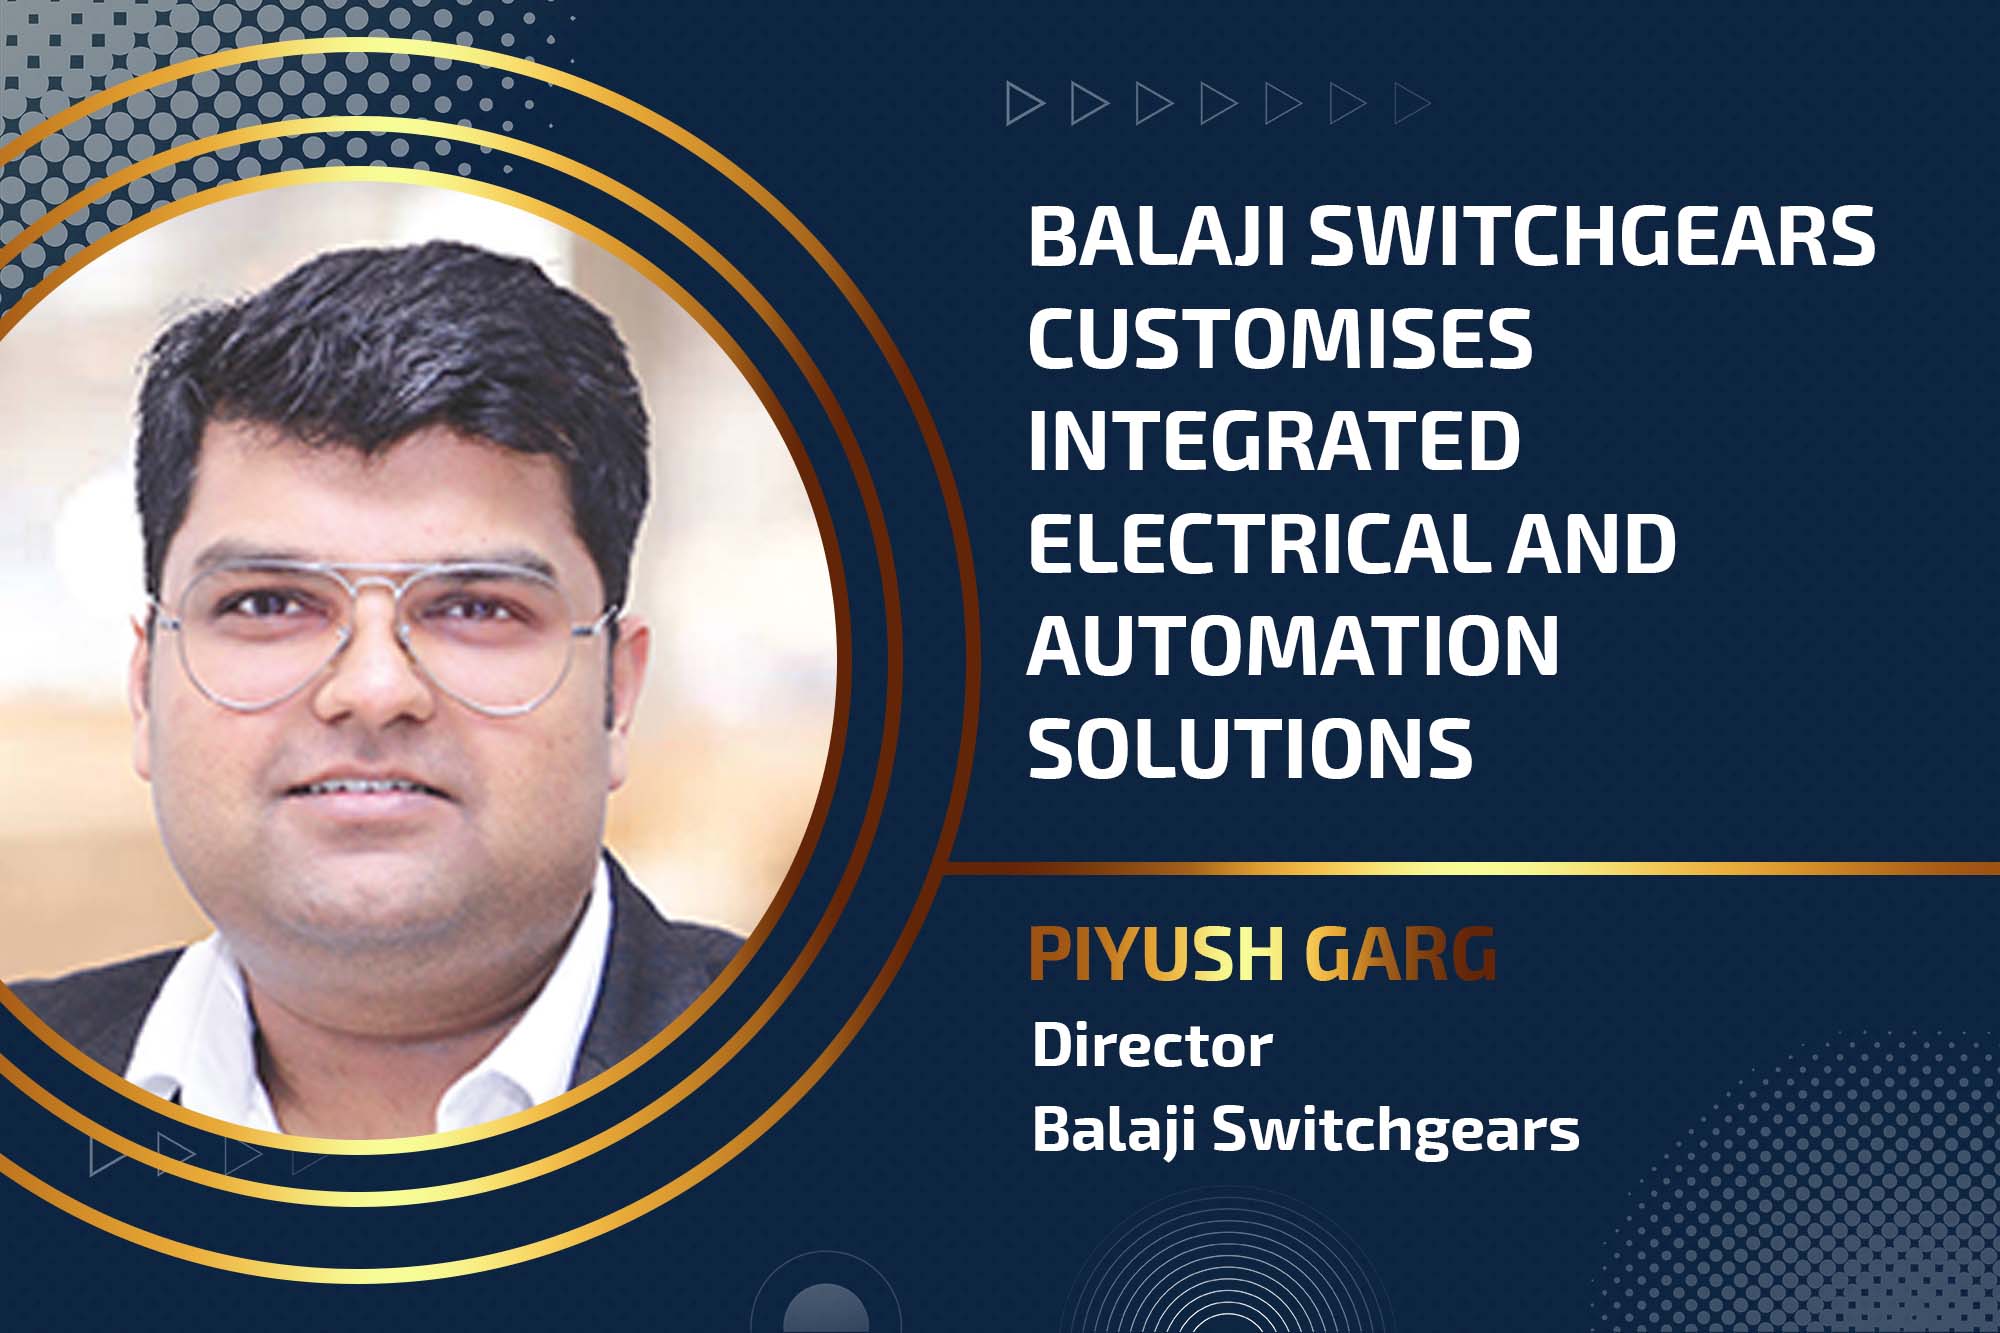 Balaji Switchgears customises integrated electrical and automation solutions  